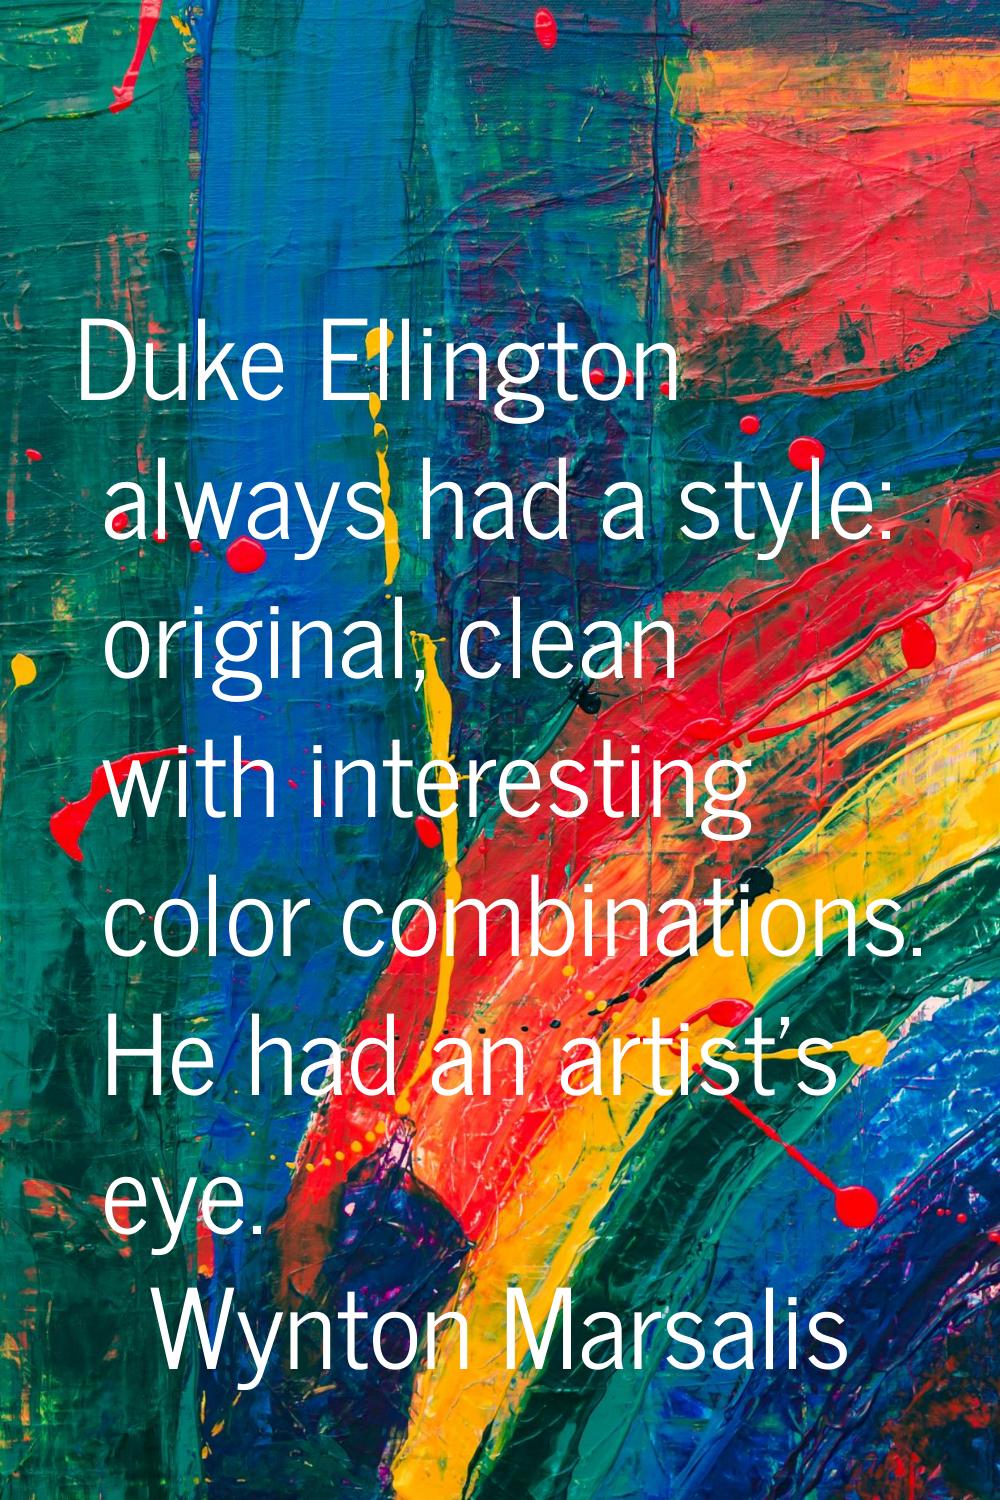 Duke Ellington always had a style: original, clean with interesting color combinations. He had an a